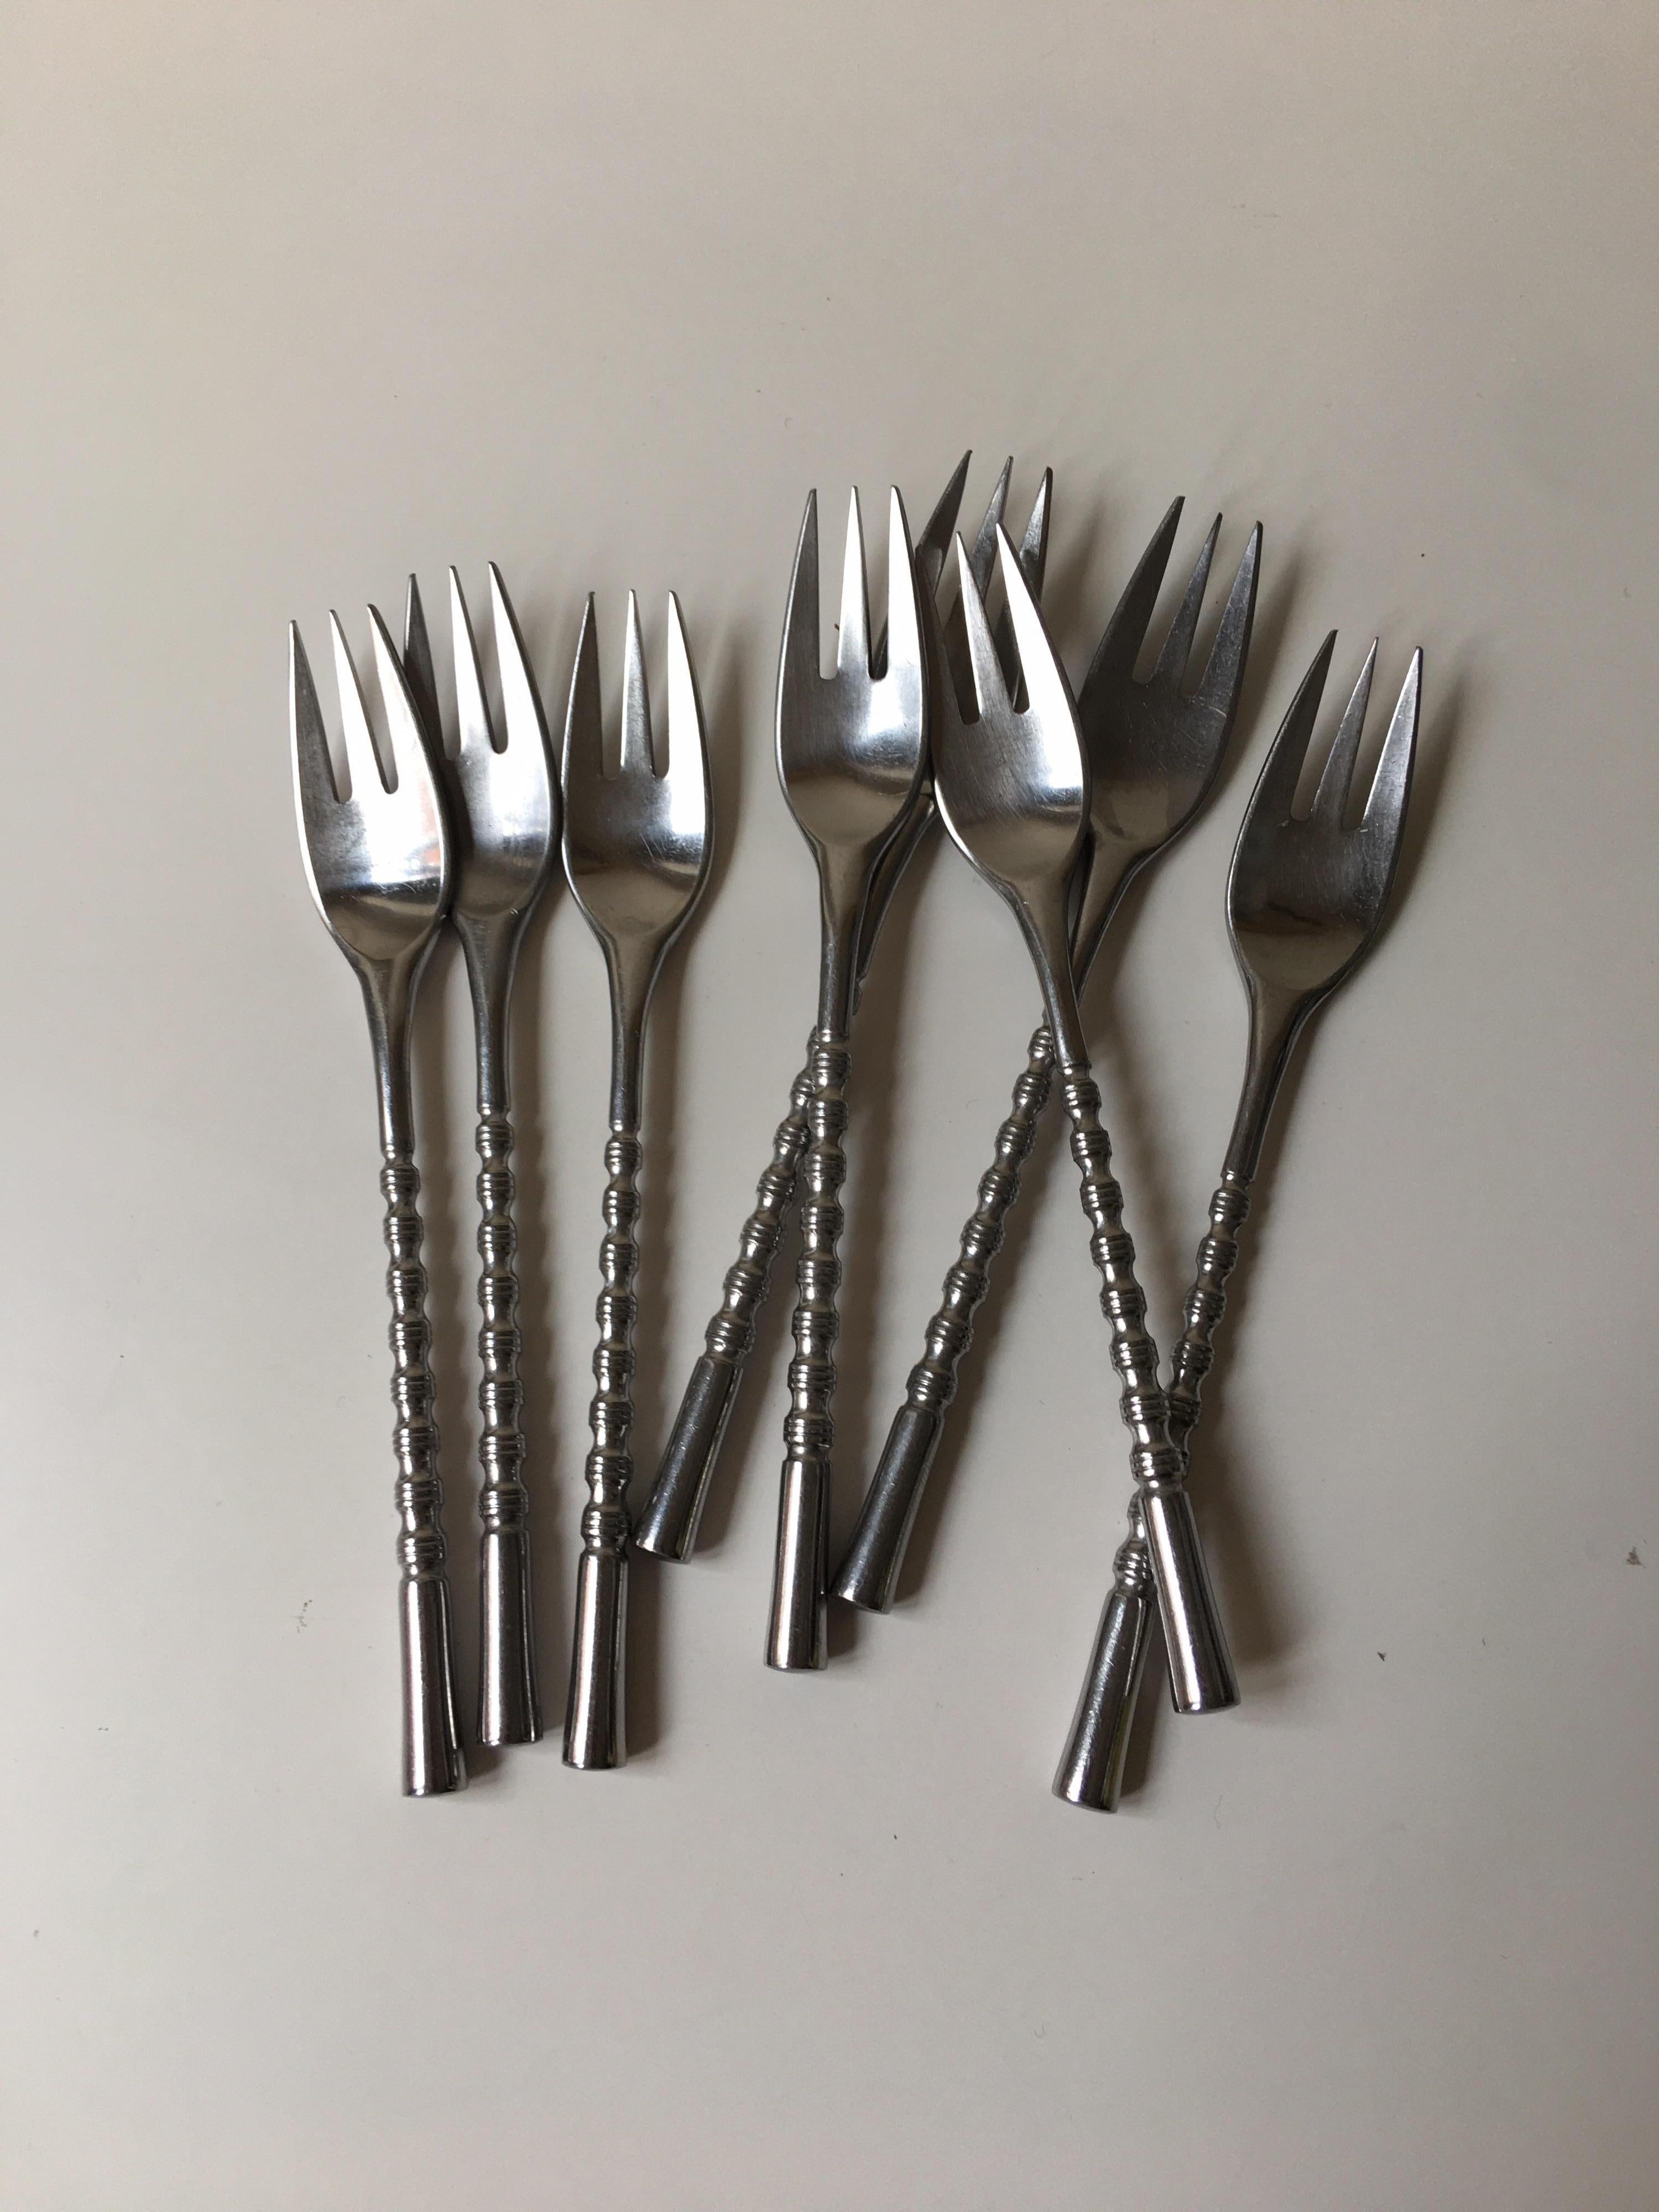 Stainless Steel Stanley Roberts Service for 8 Mid-Century Modern Flatware Set 50 Pieces.